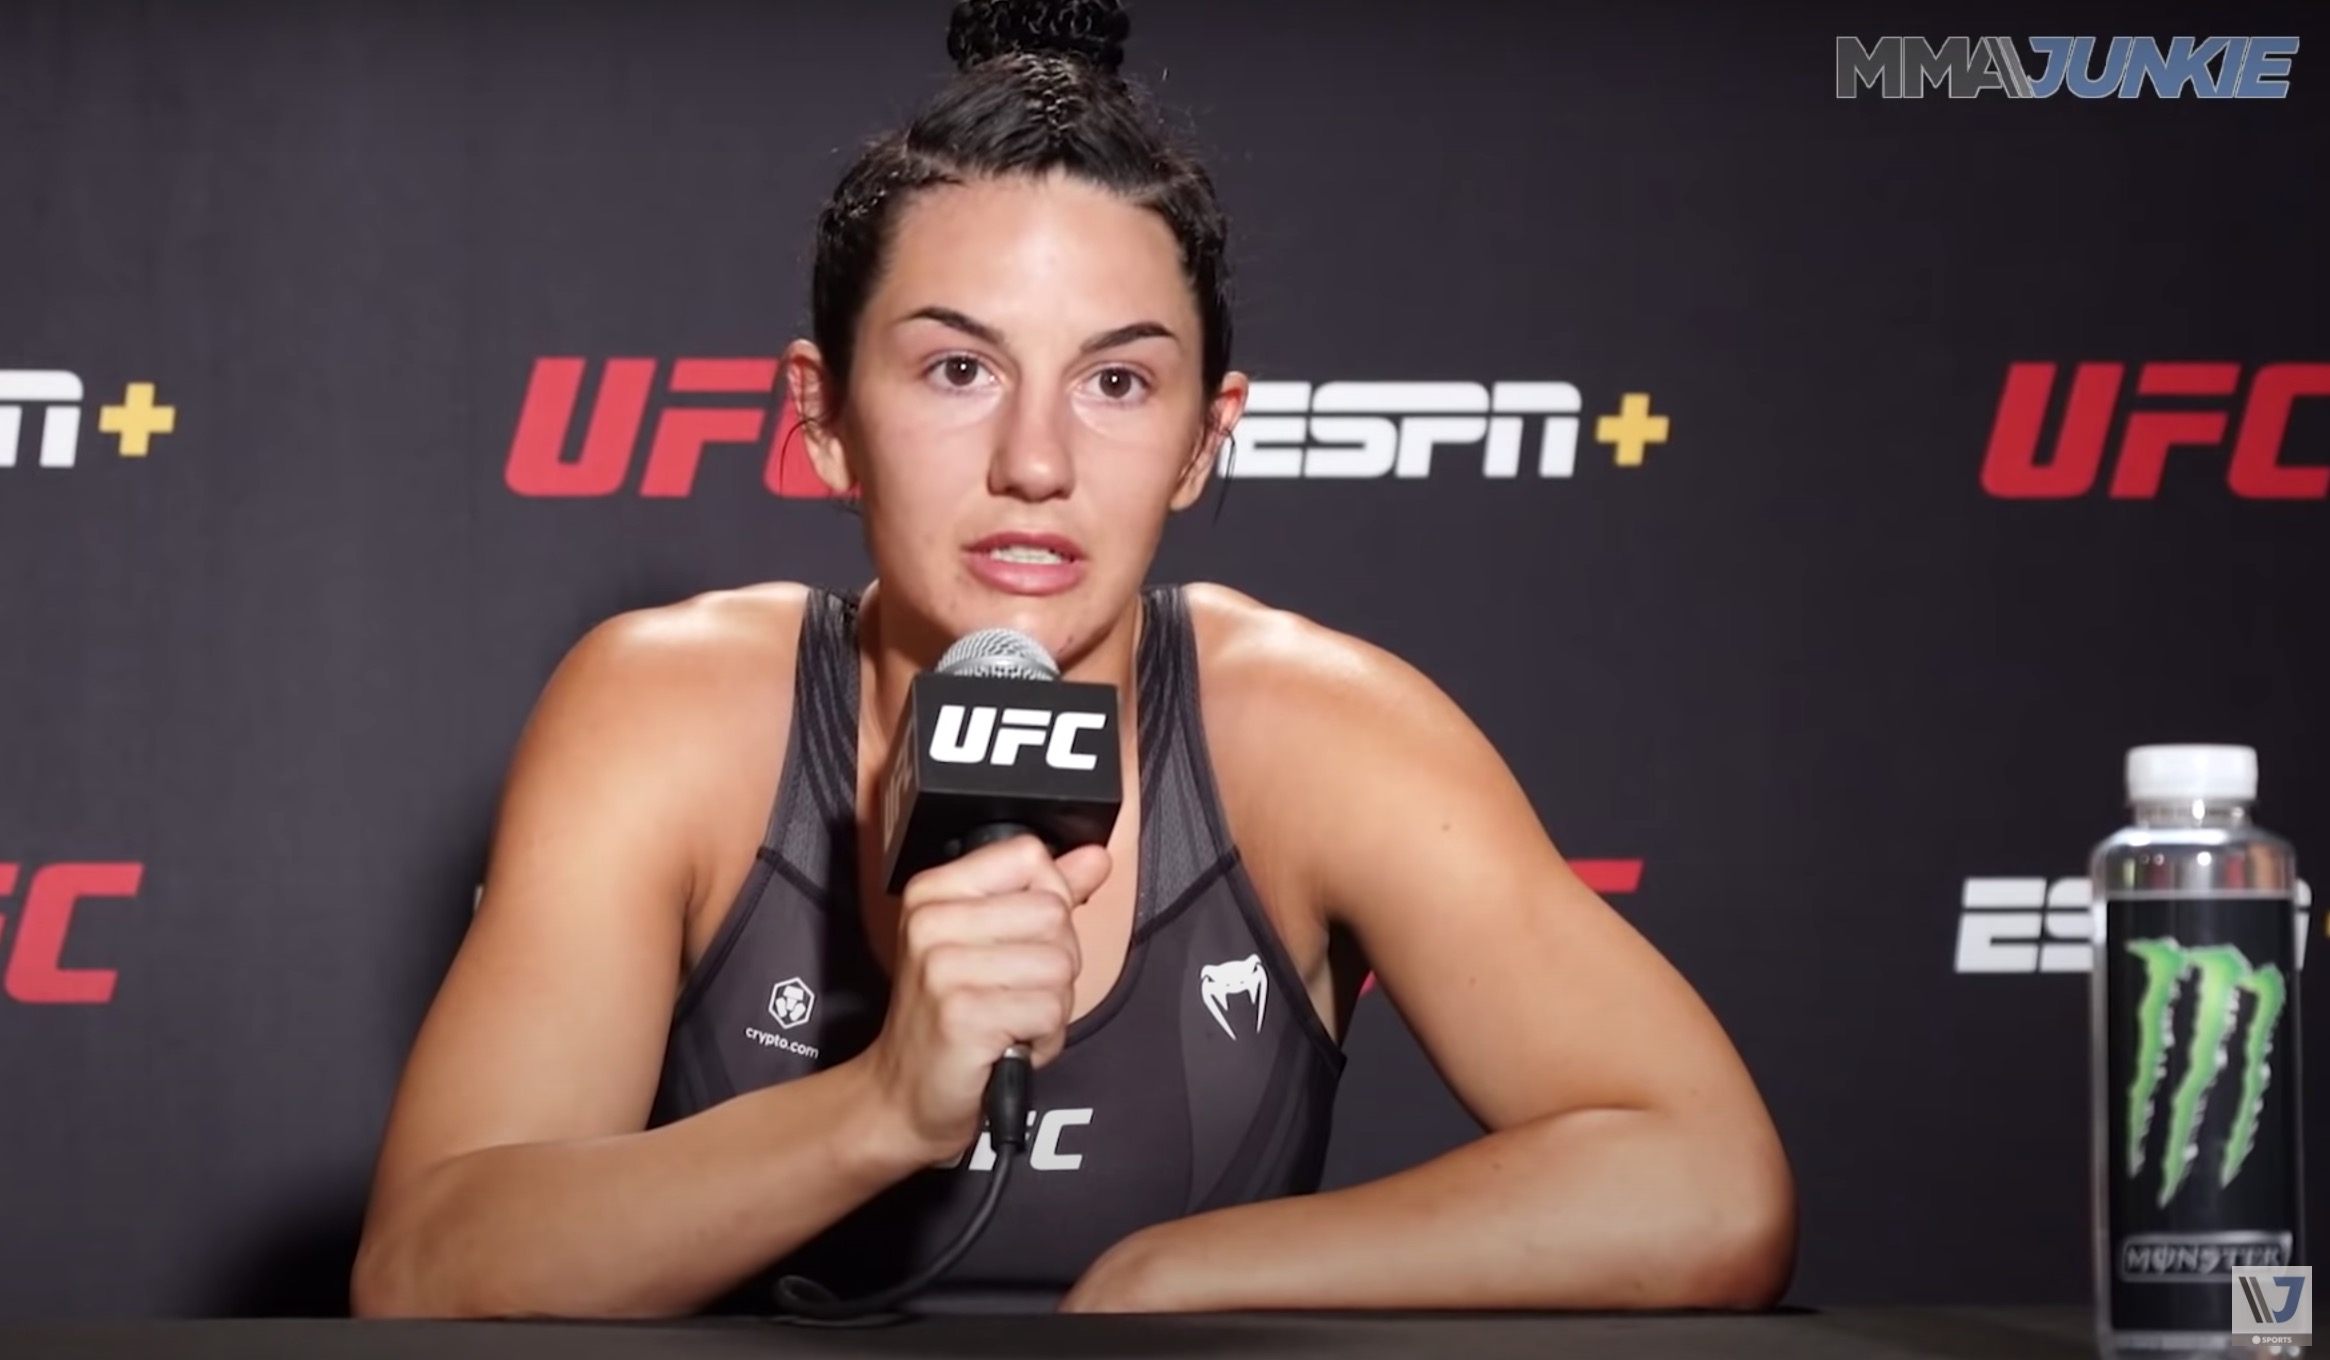 Buys giving her post-fight presser.